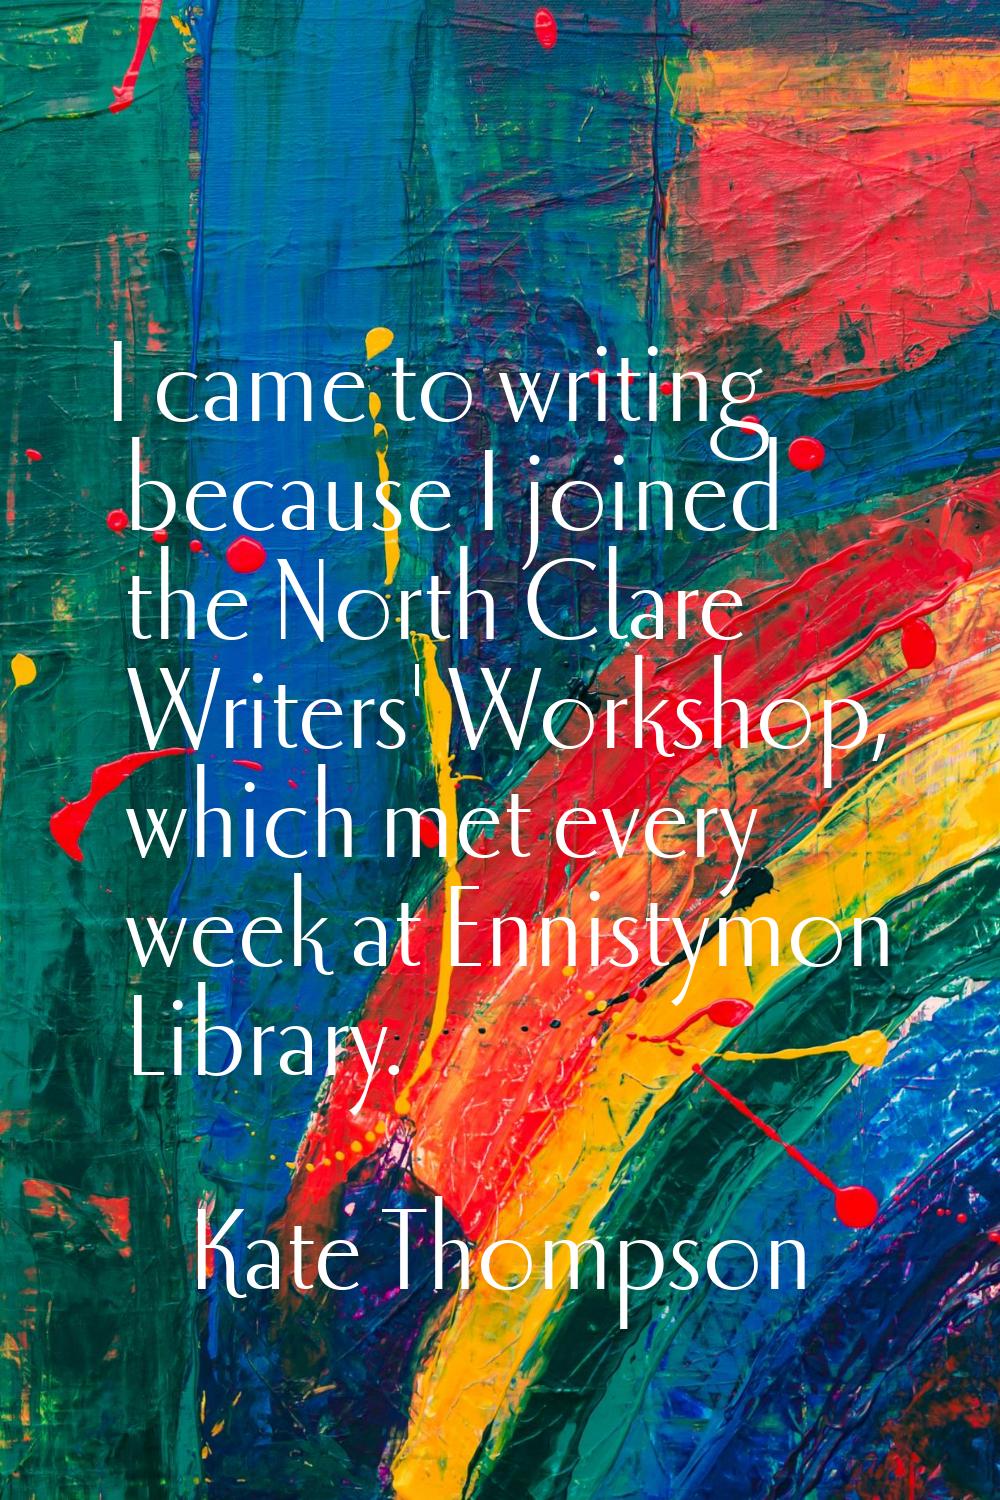 I came to writing because I joined the North Clare Writers' Workshop, which met every week at Ennis